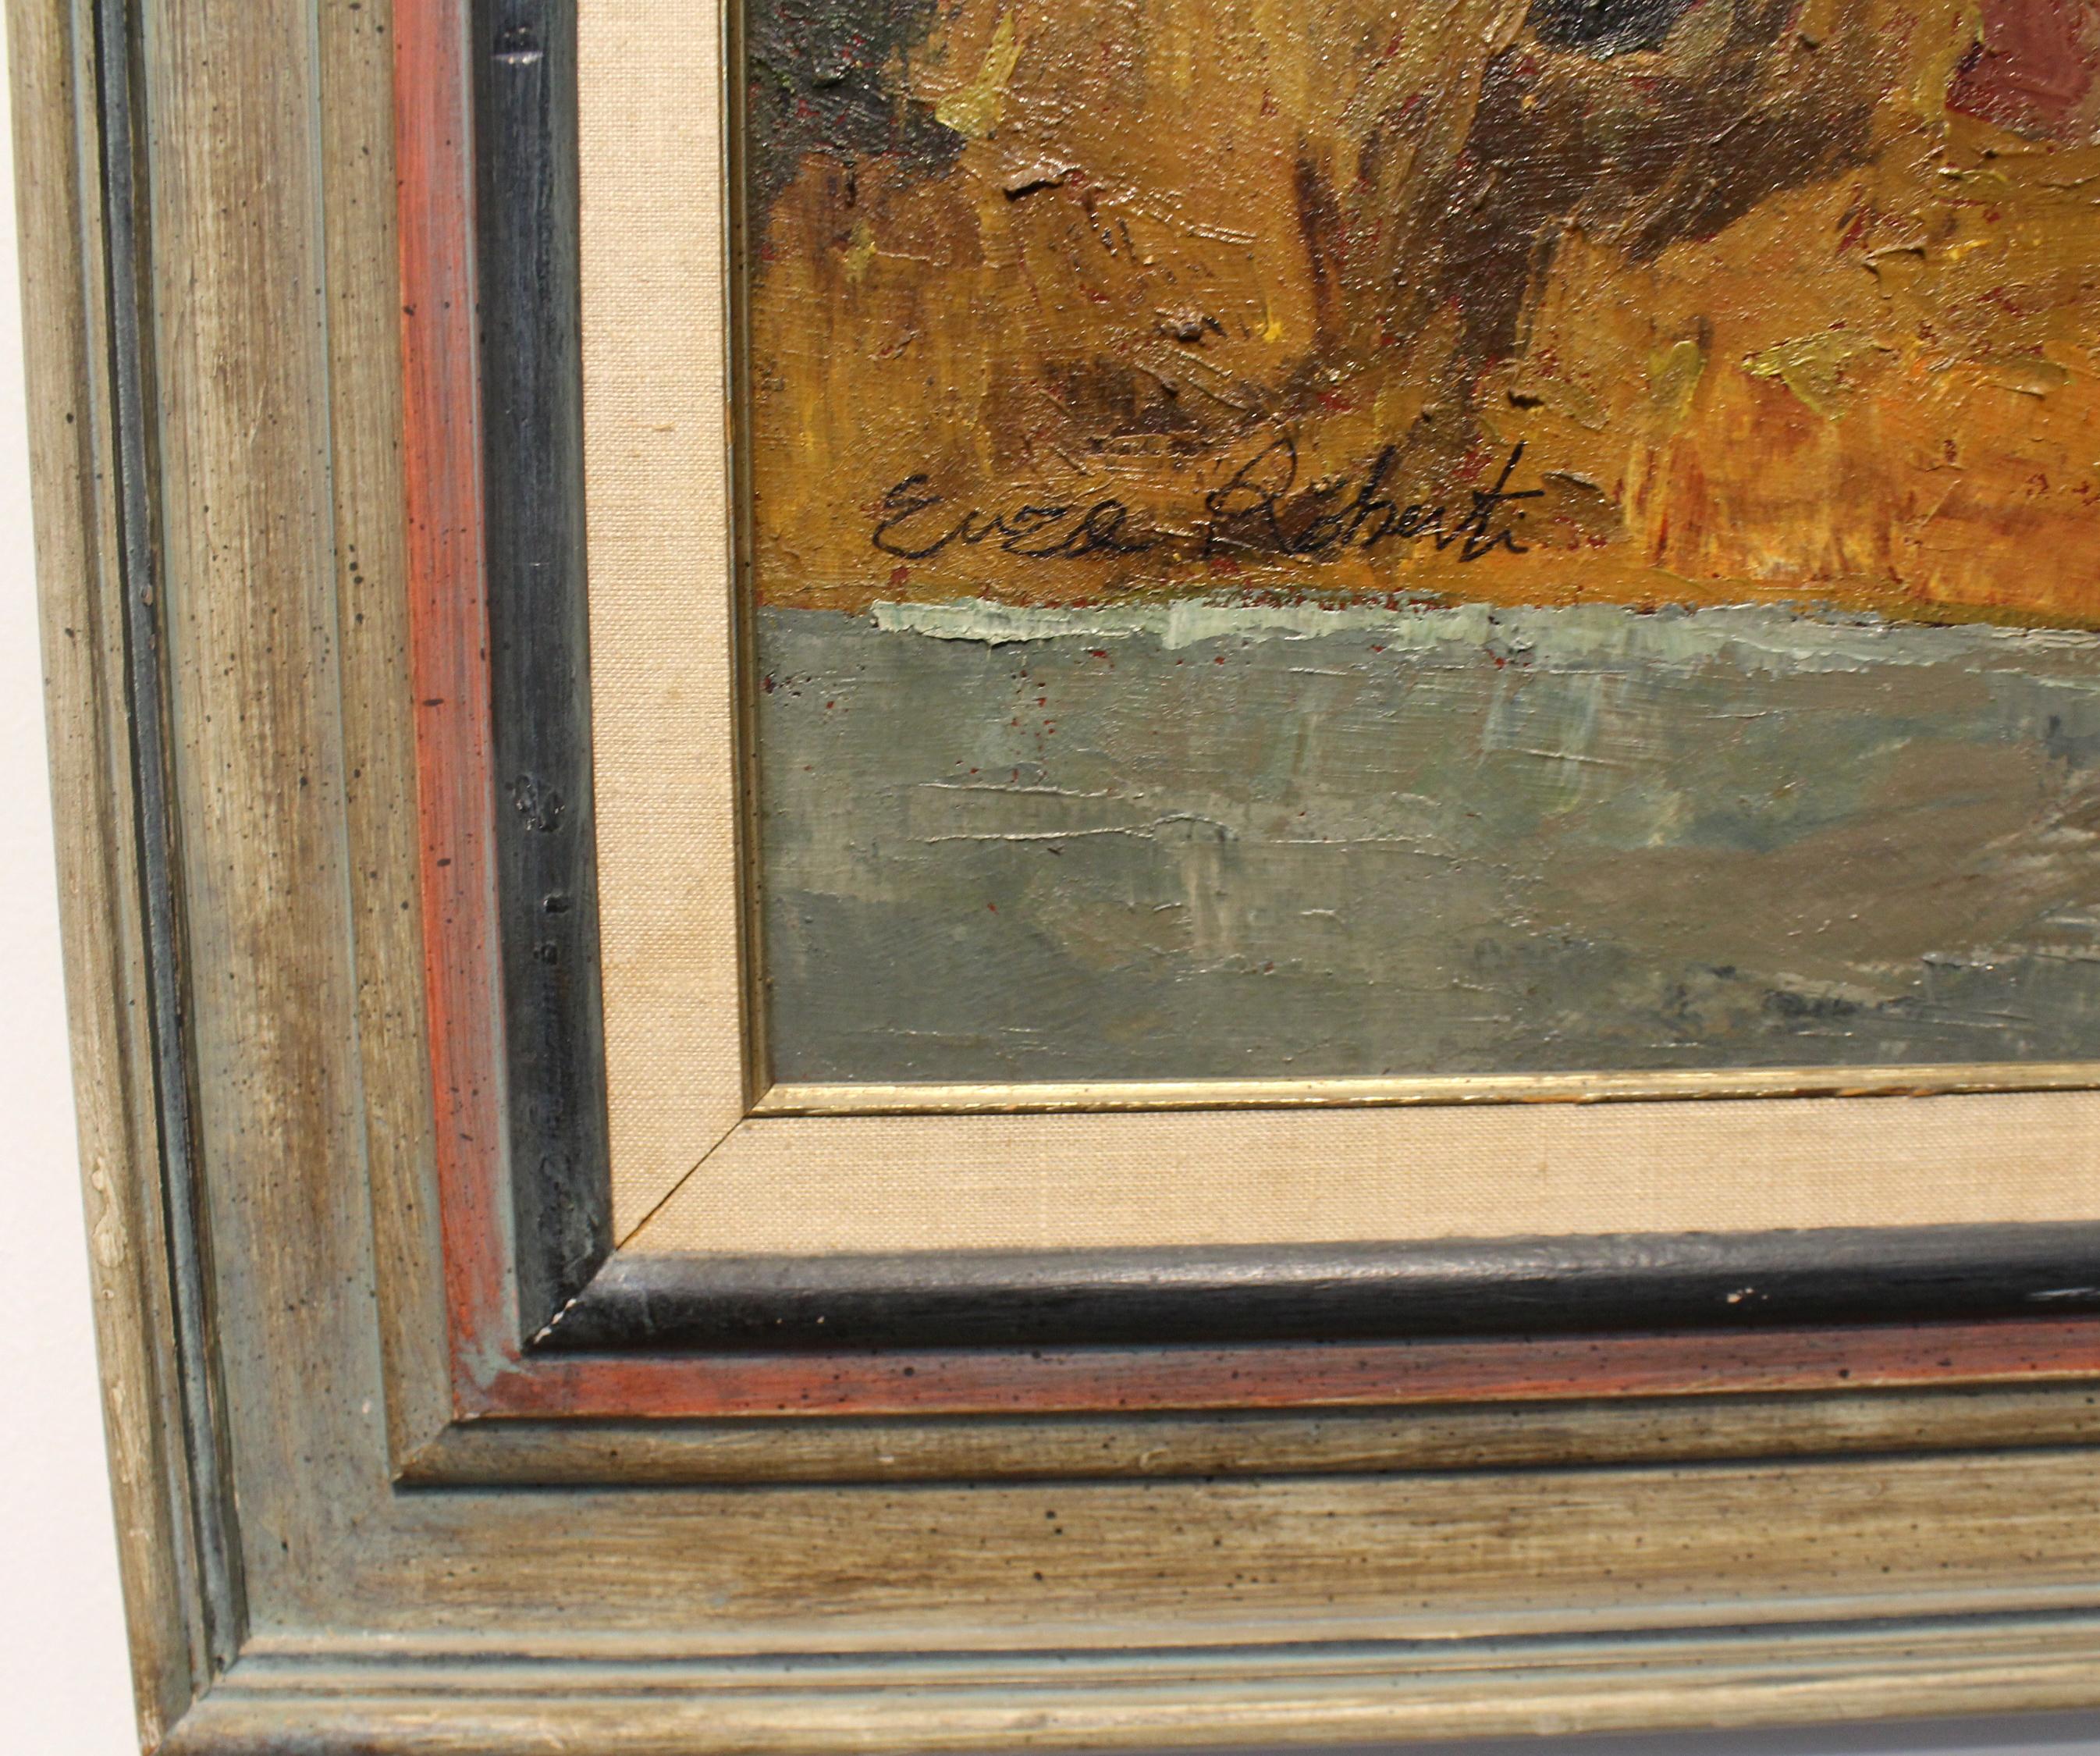 Hand-Painted 20th Century Expressionist Window Landscape by Italian Artist Enzo Roberti For Sale